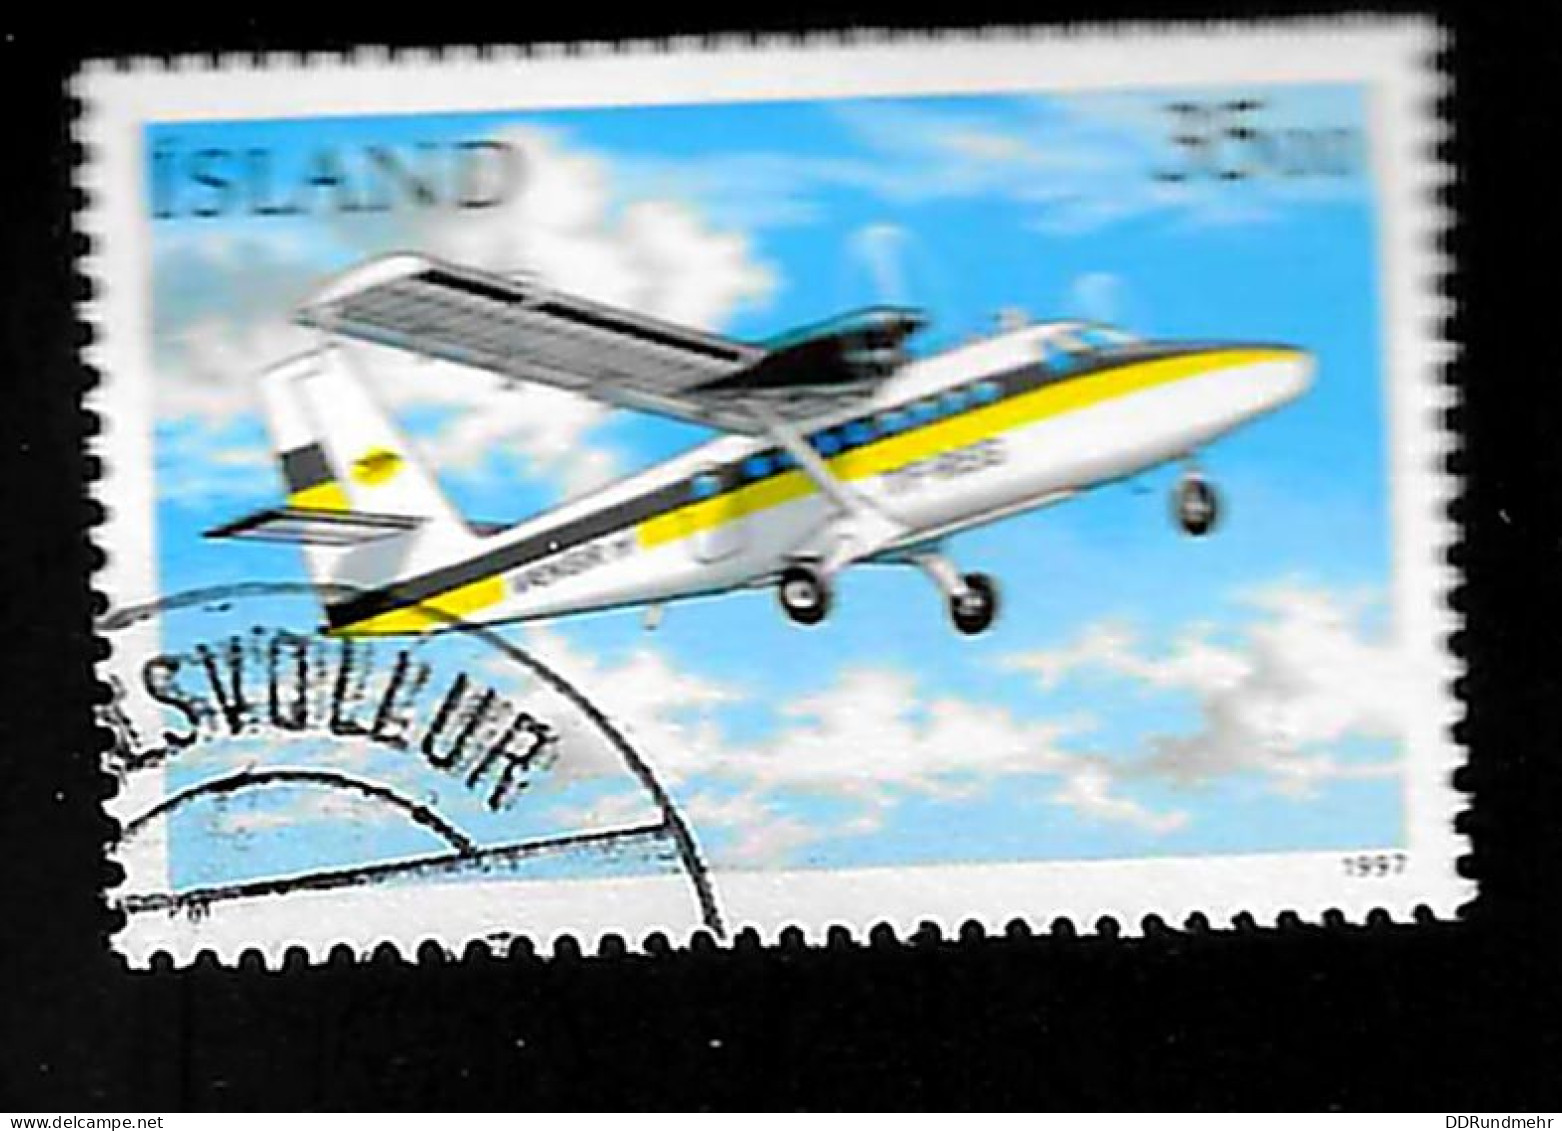 1997 Postal Aircrafts Michel IS 869 Stamp Number IS 841 Stanley Gibbons IS 882 AFA IS 854 Used - Usados